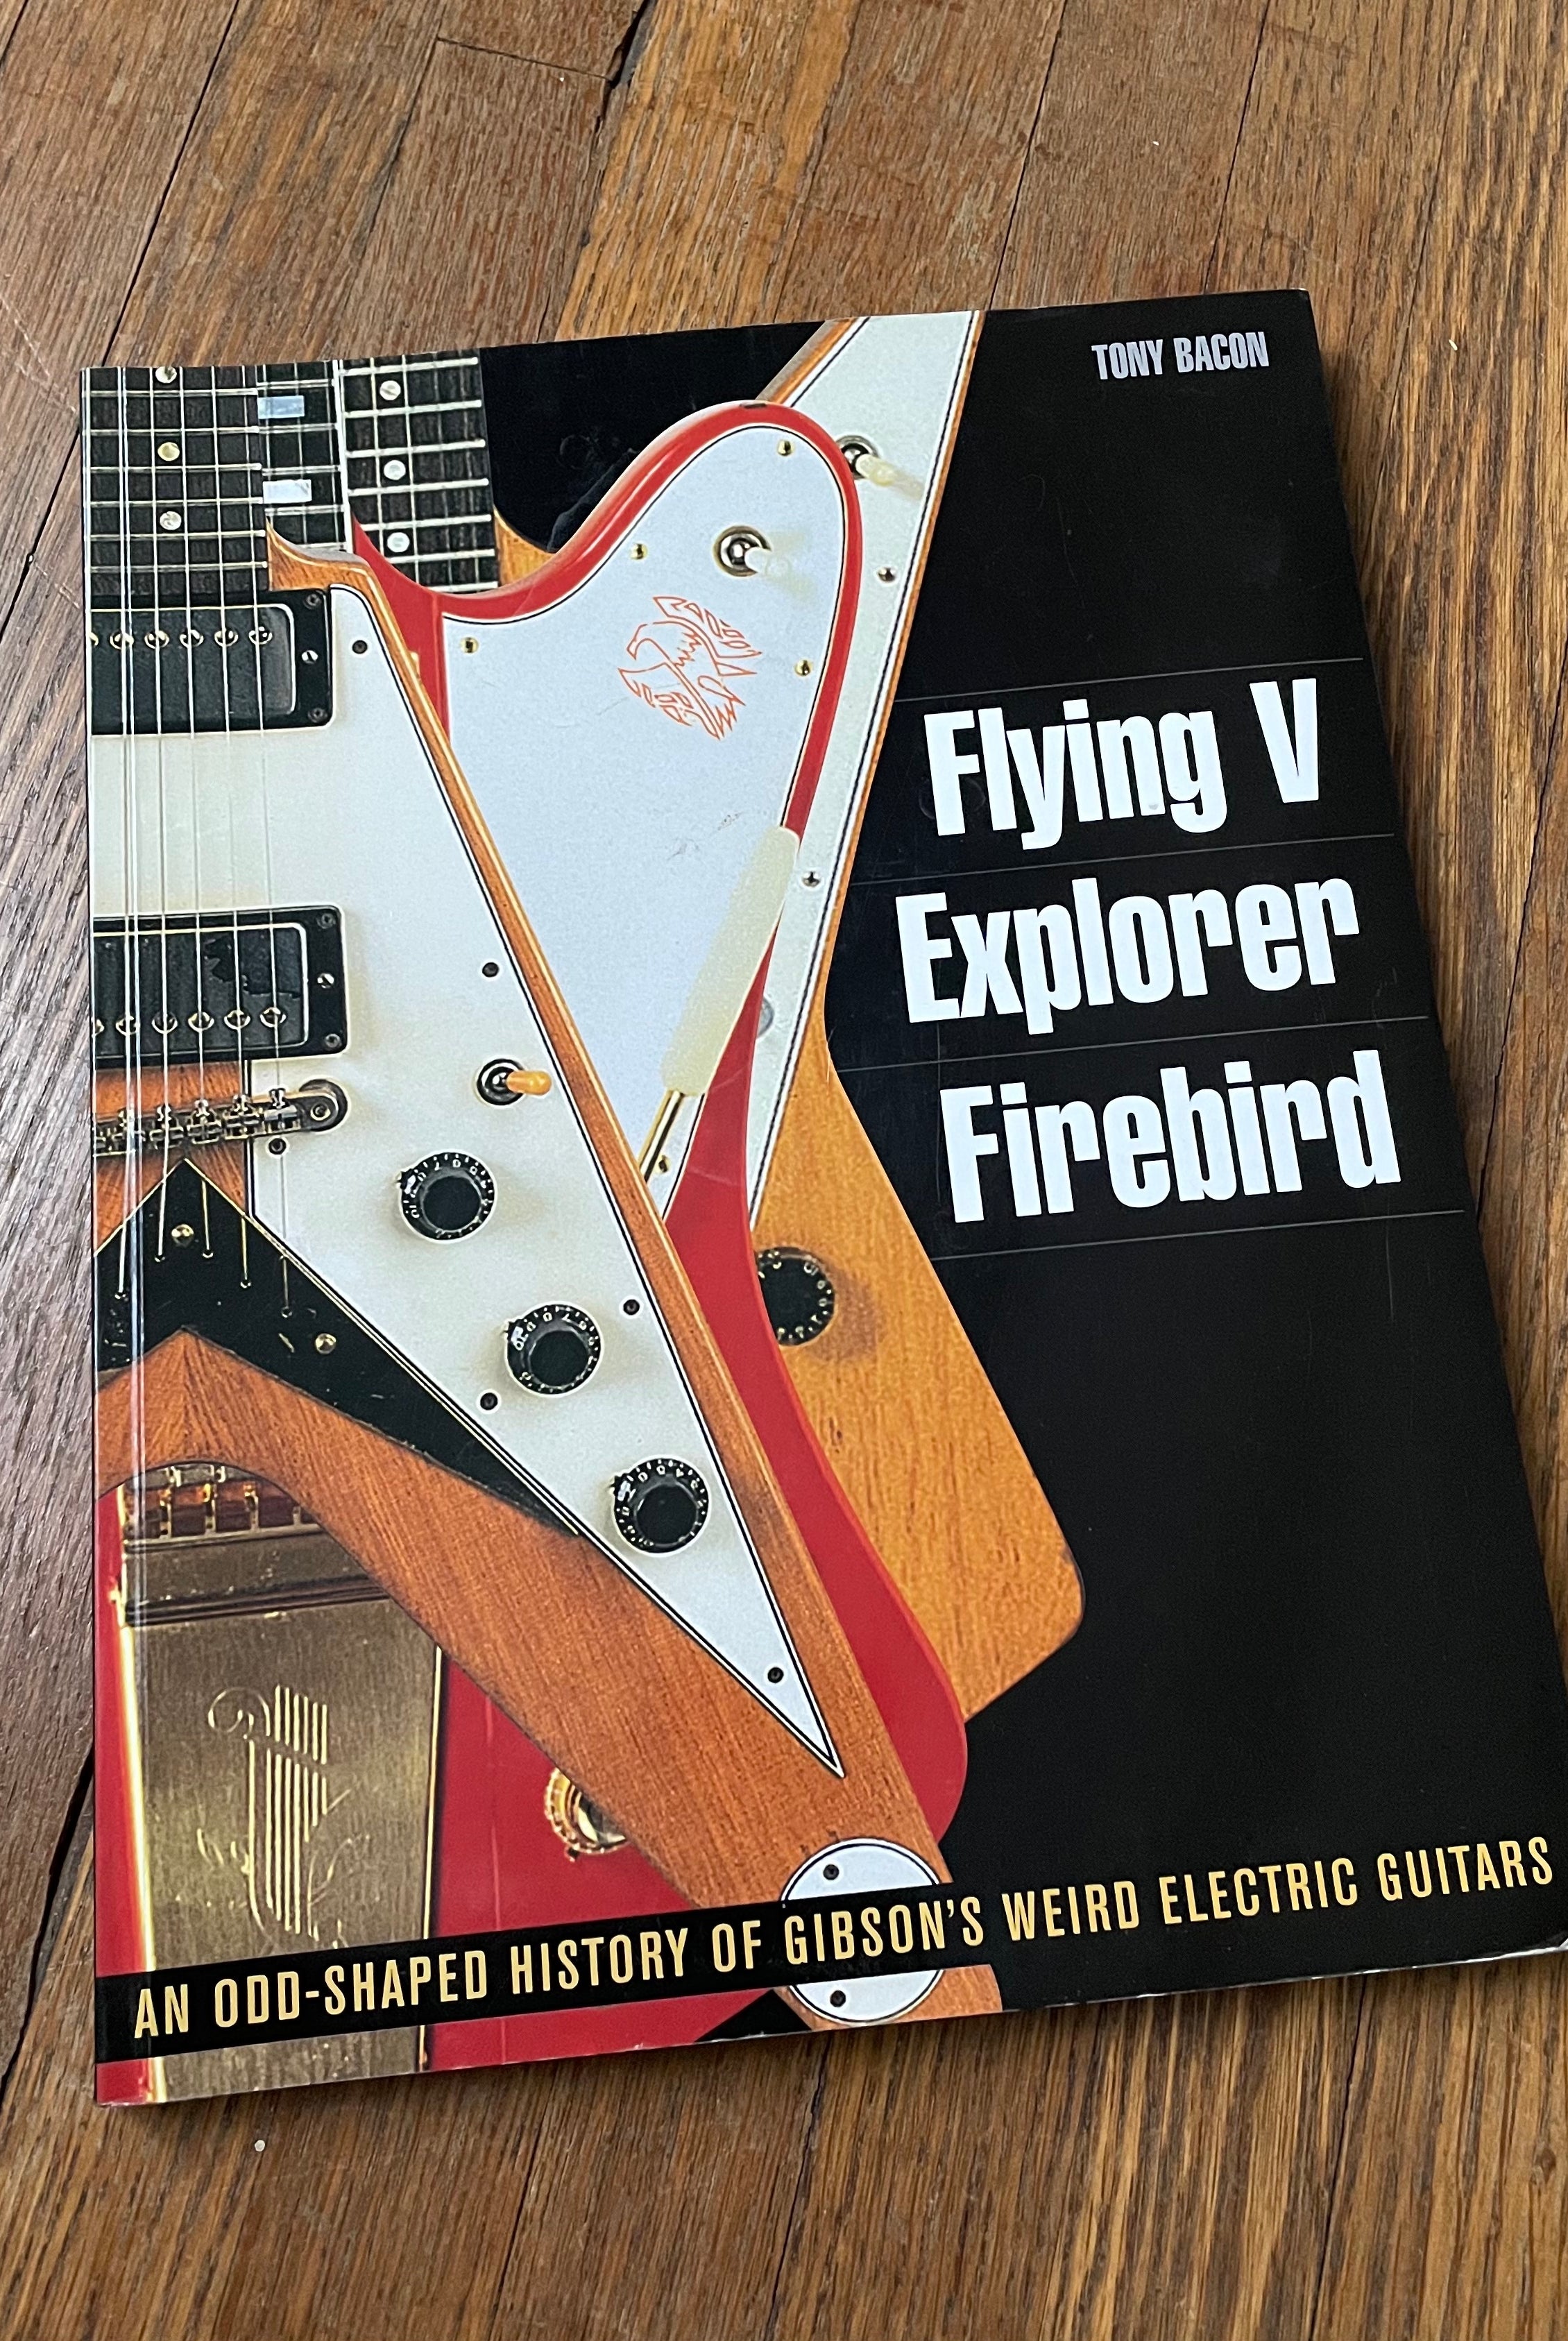 Where to find more information on vintage Gibson Flying V, Explorer, and Firebird guitars from the 1950s, 1960s, and 1970s